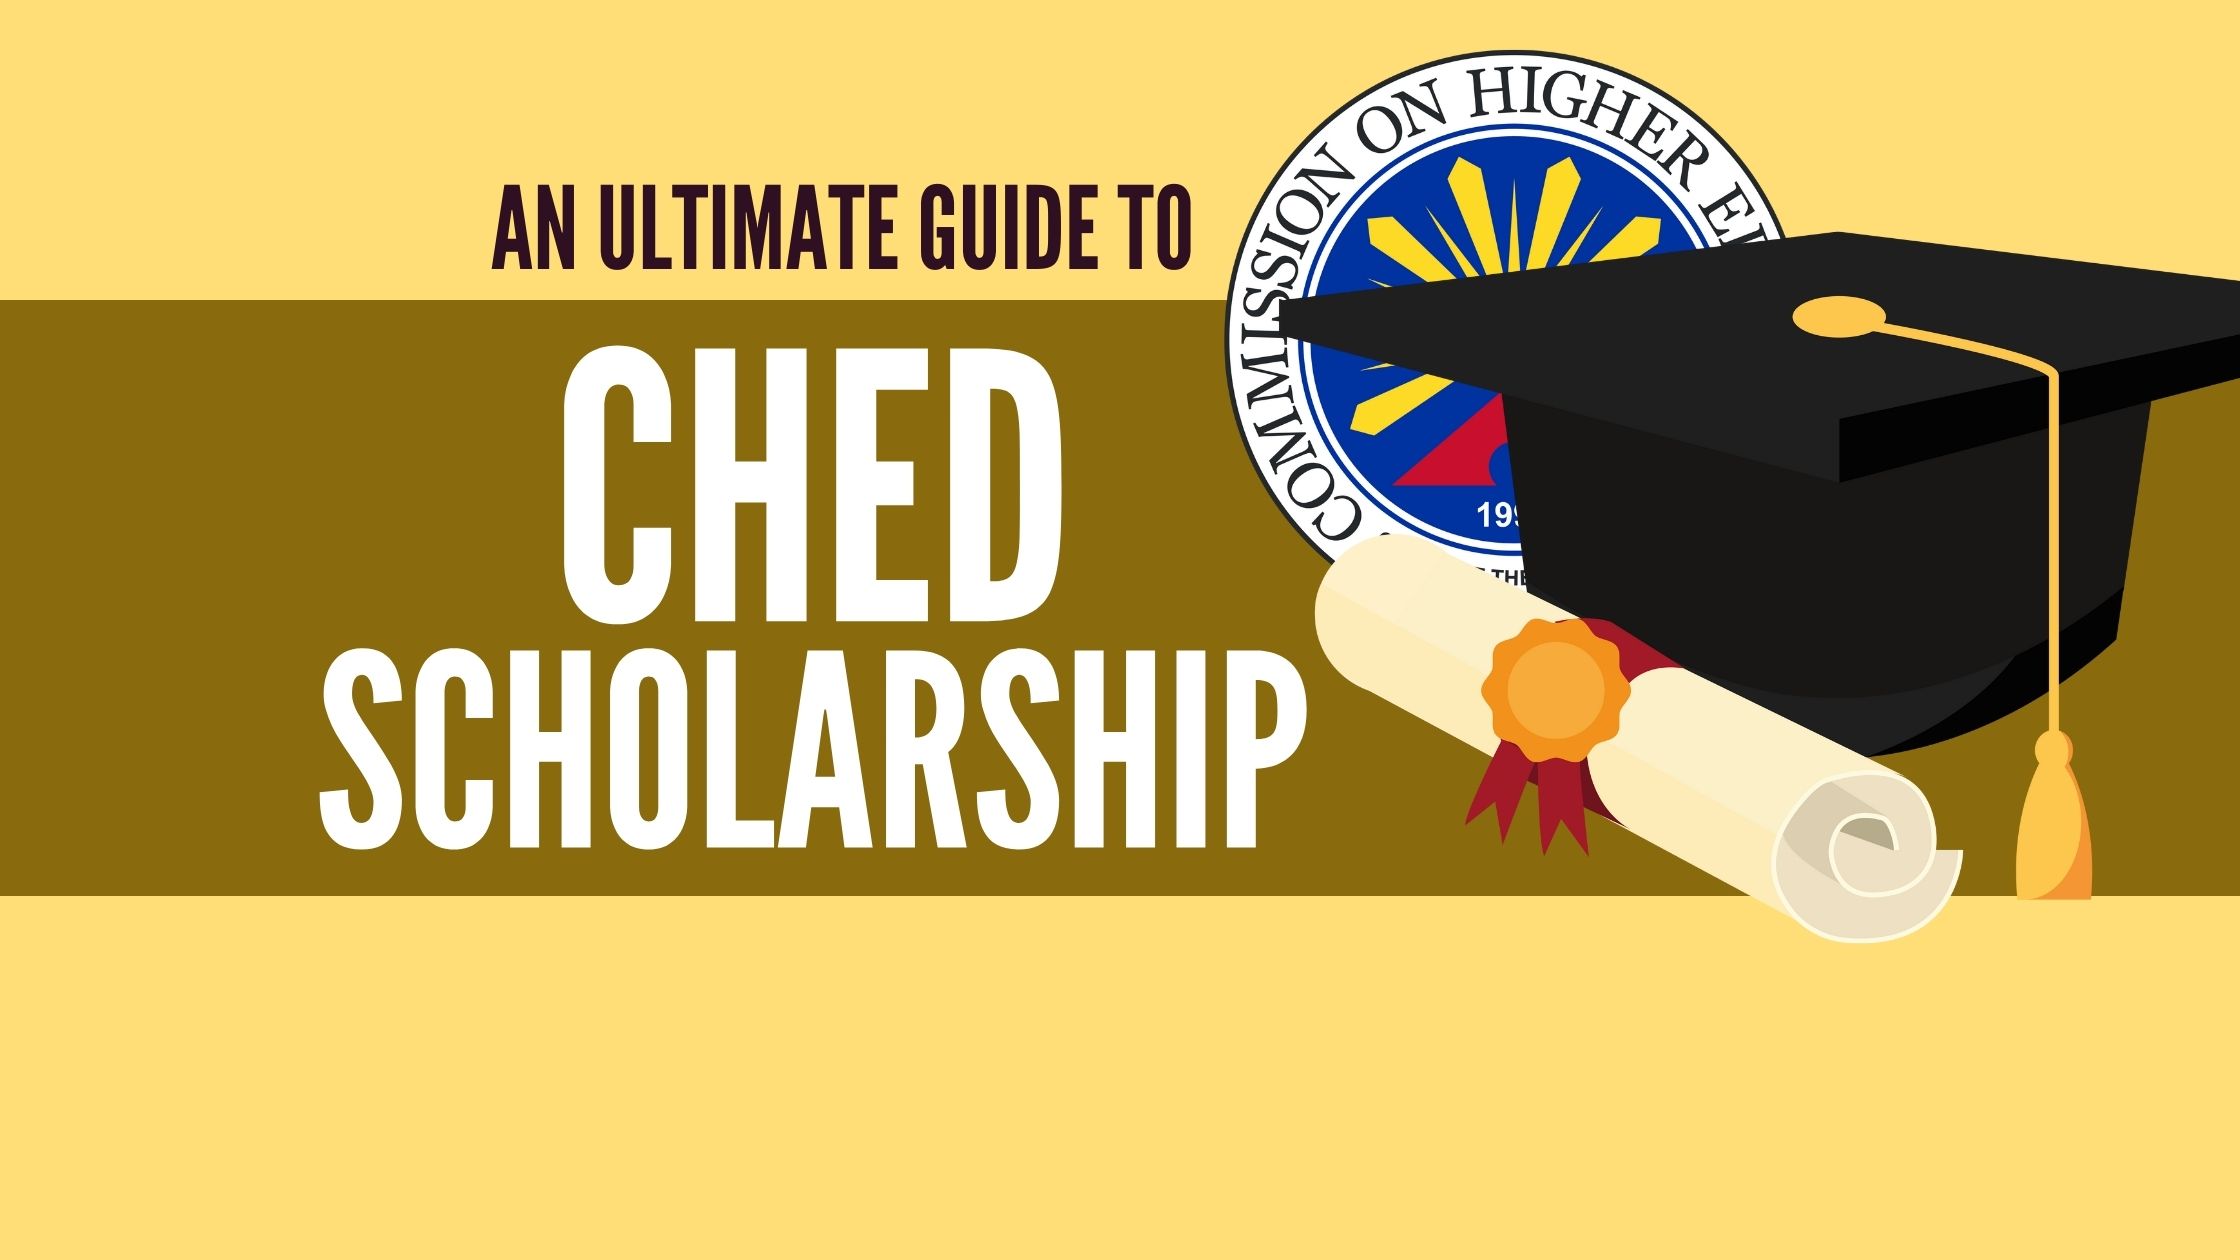 CHED Scholarship 2021 Guide: Application Courses and Requirements